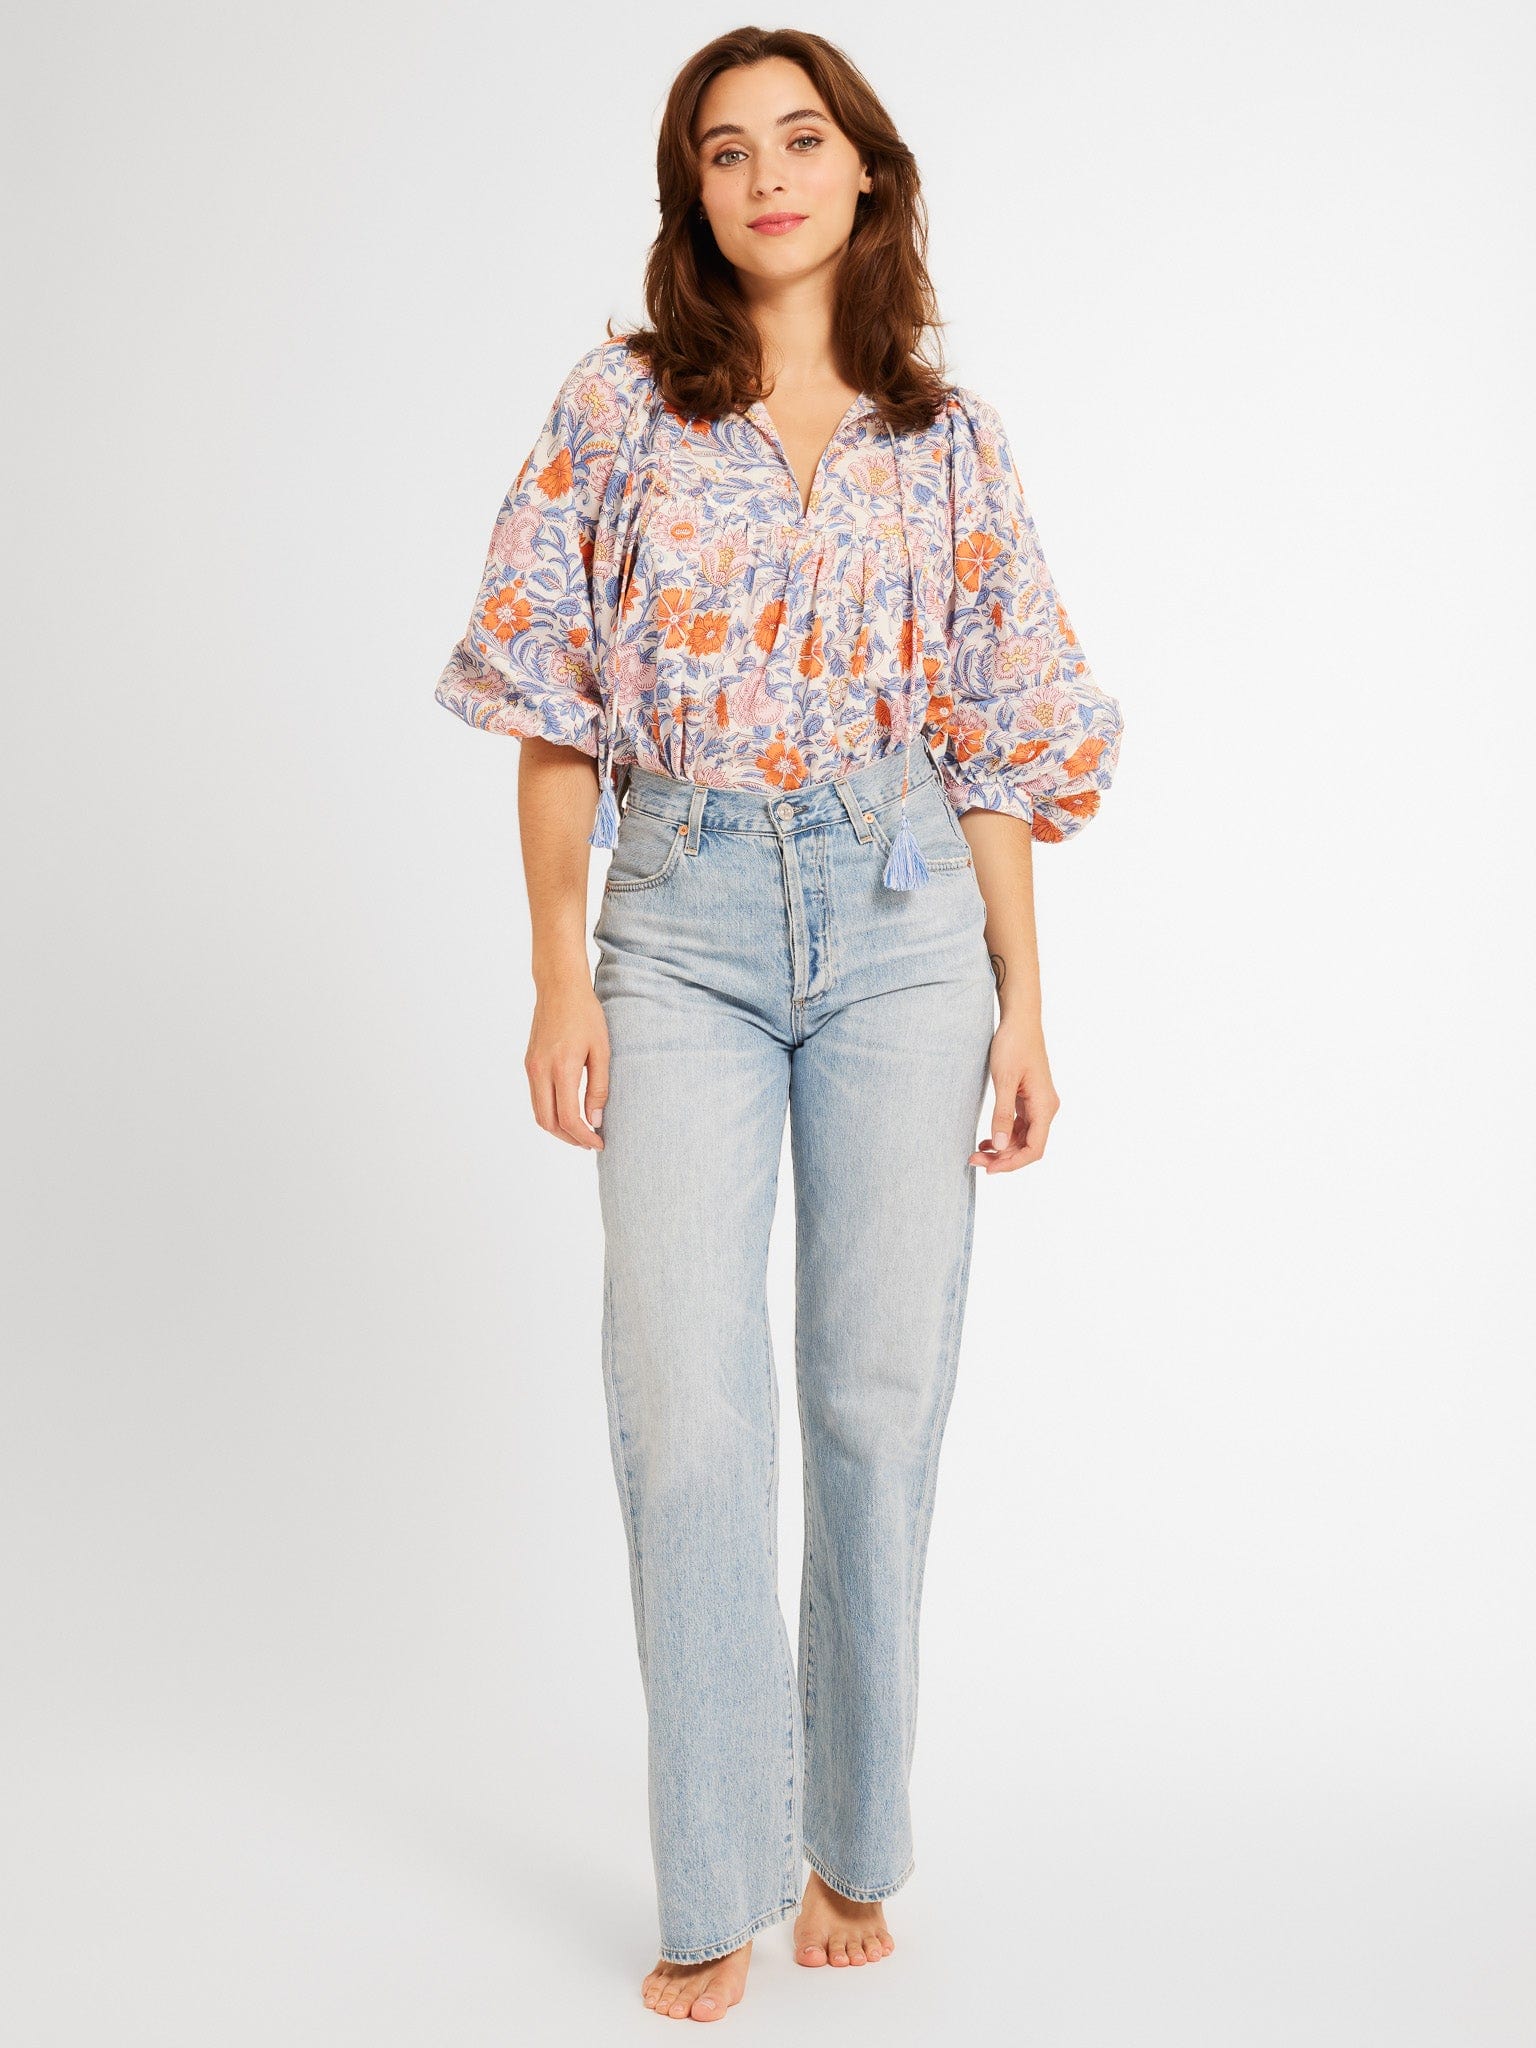 MILLE Clothing Charlie Top in Newport Floral